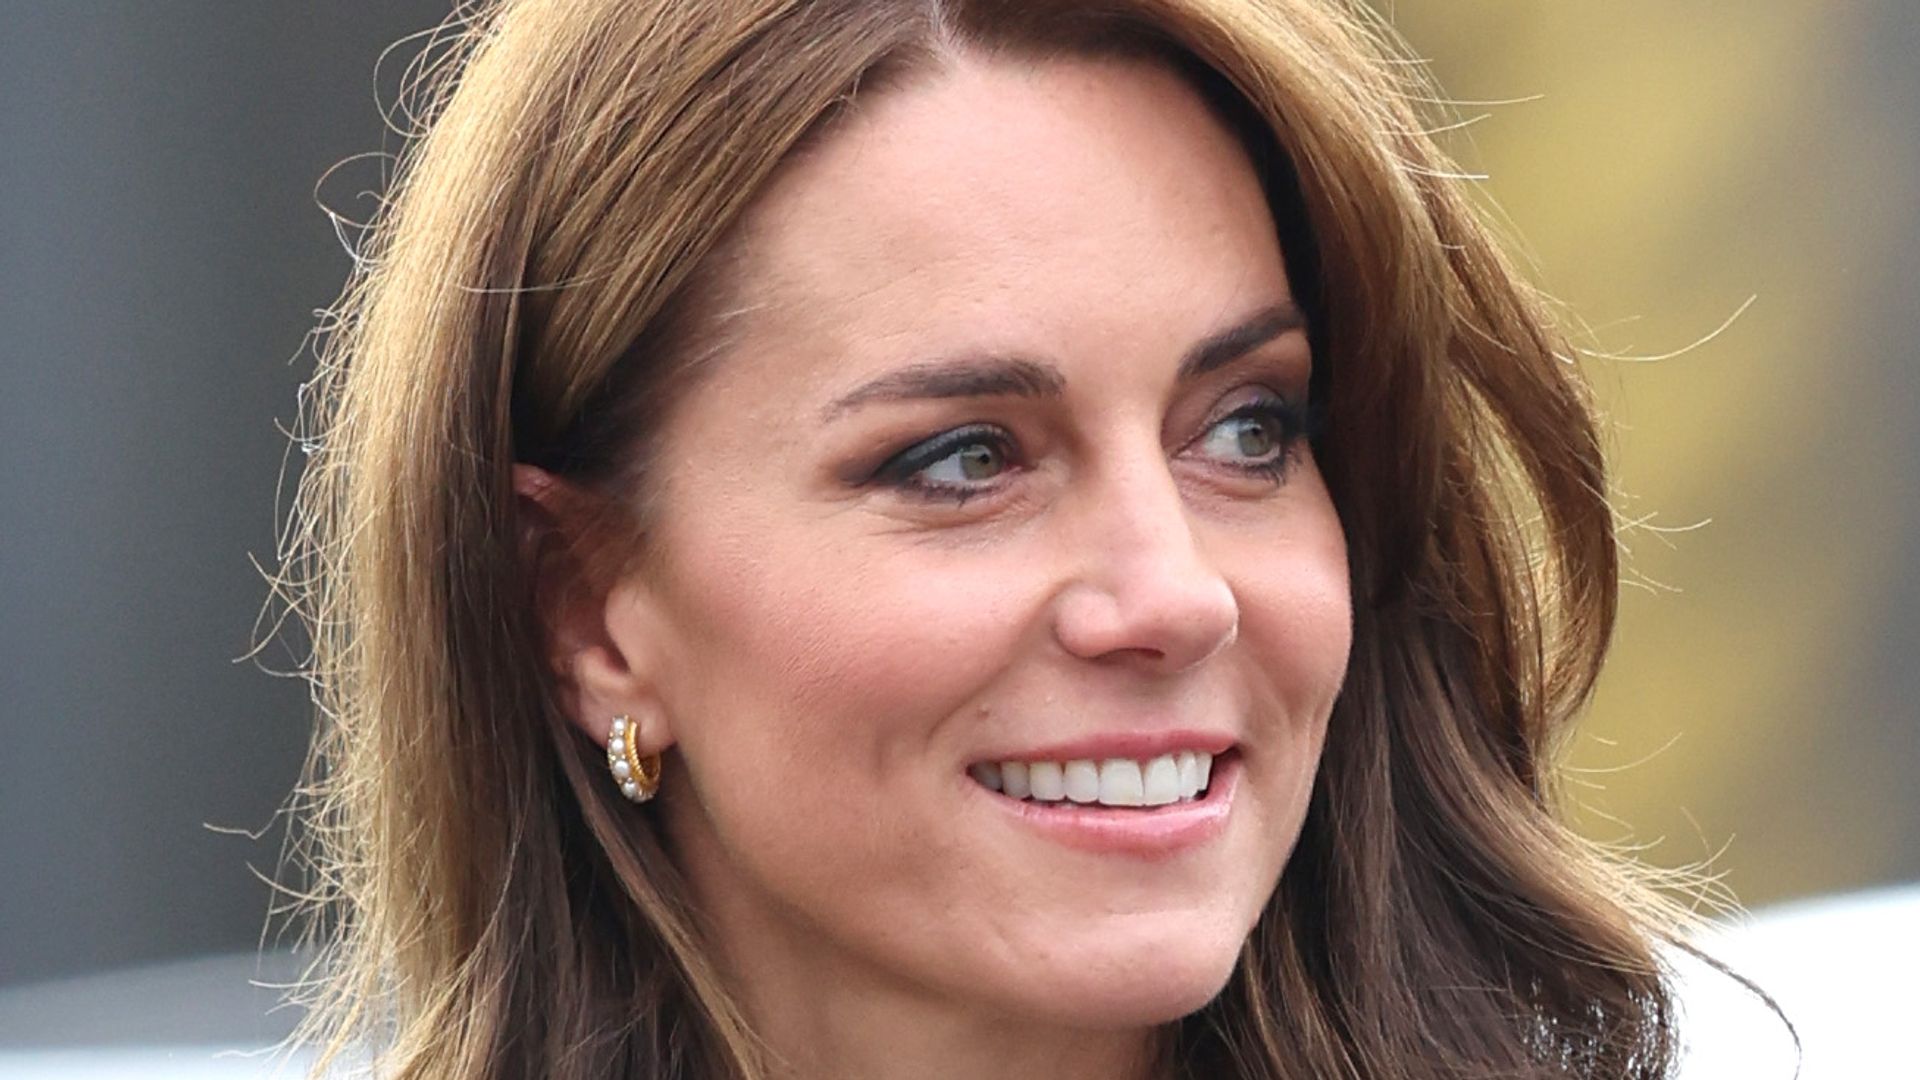 Kate Middleton with bouncy hair and gold pearl earrings at AW Hainsworth